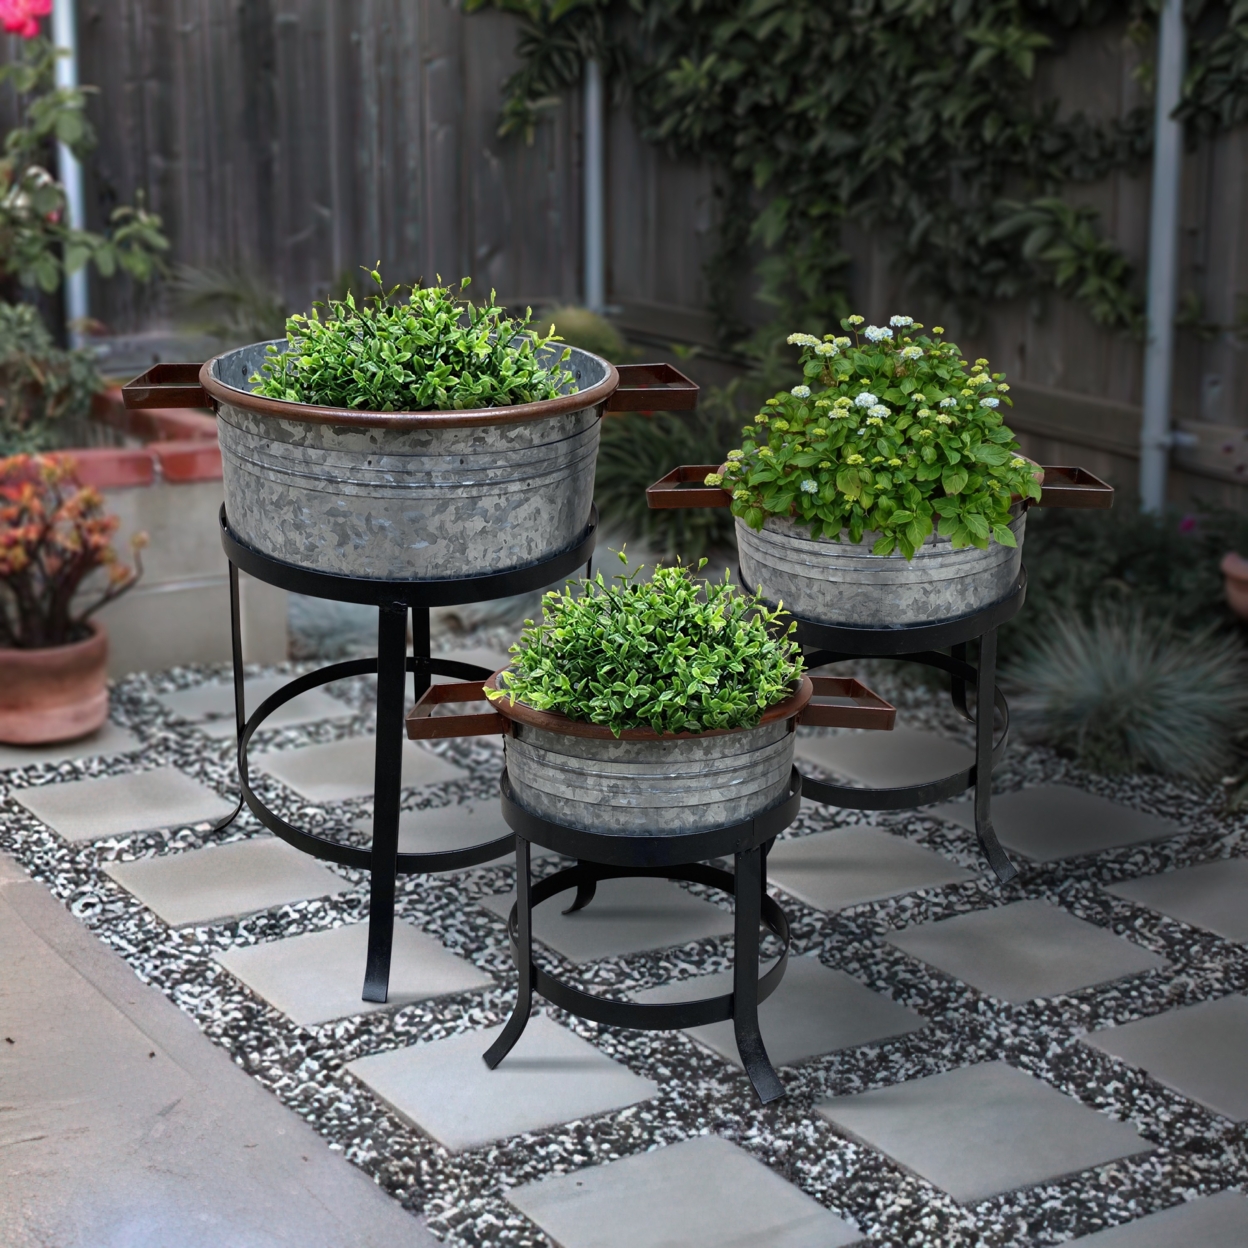 21, 18, And 16 Inch 3 Piece Round Tub Metal Planter Set With Stand In Galvanized Gray And Black Iron- Saltoro Sherpi